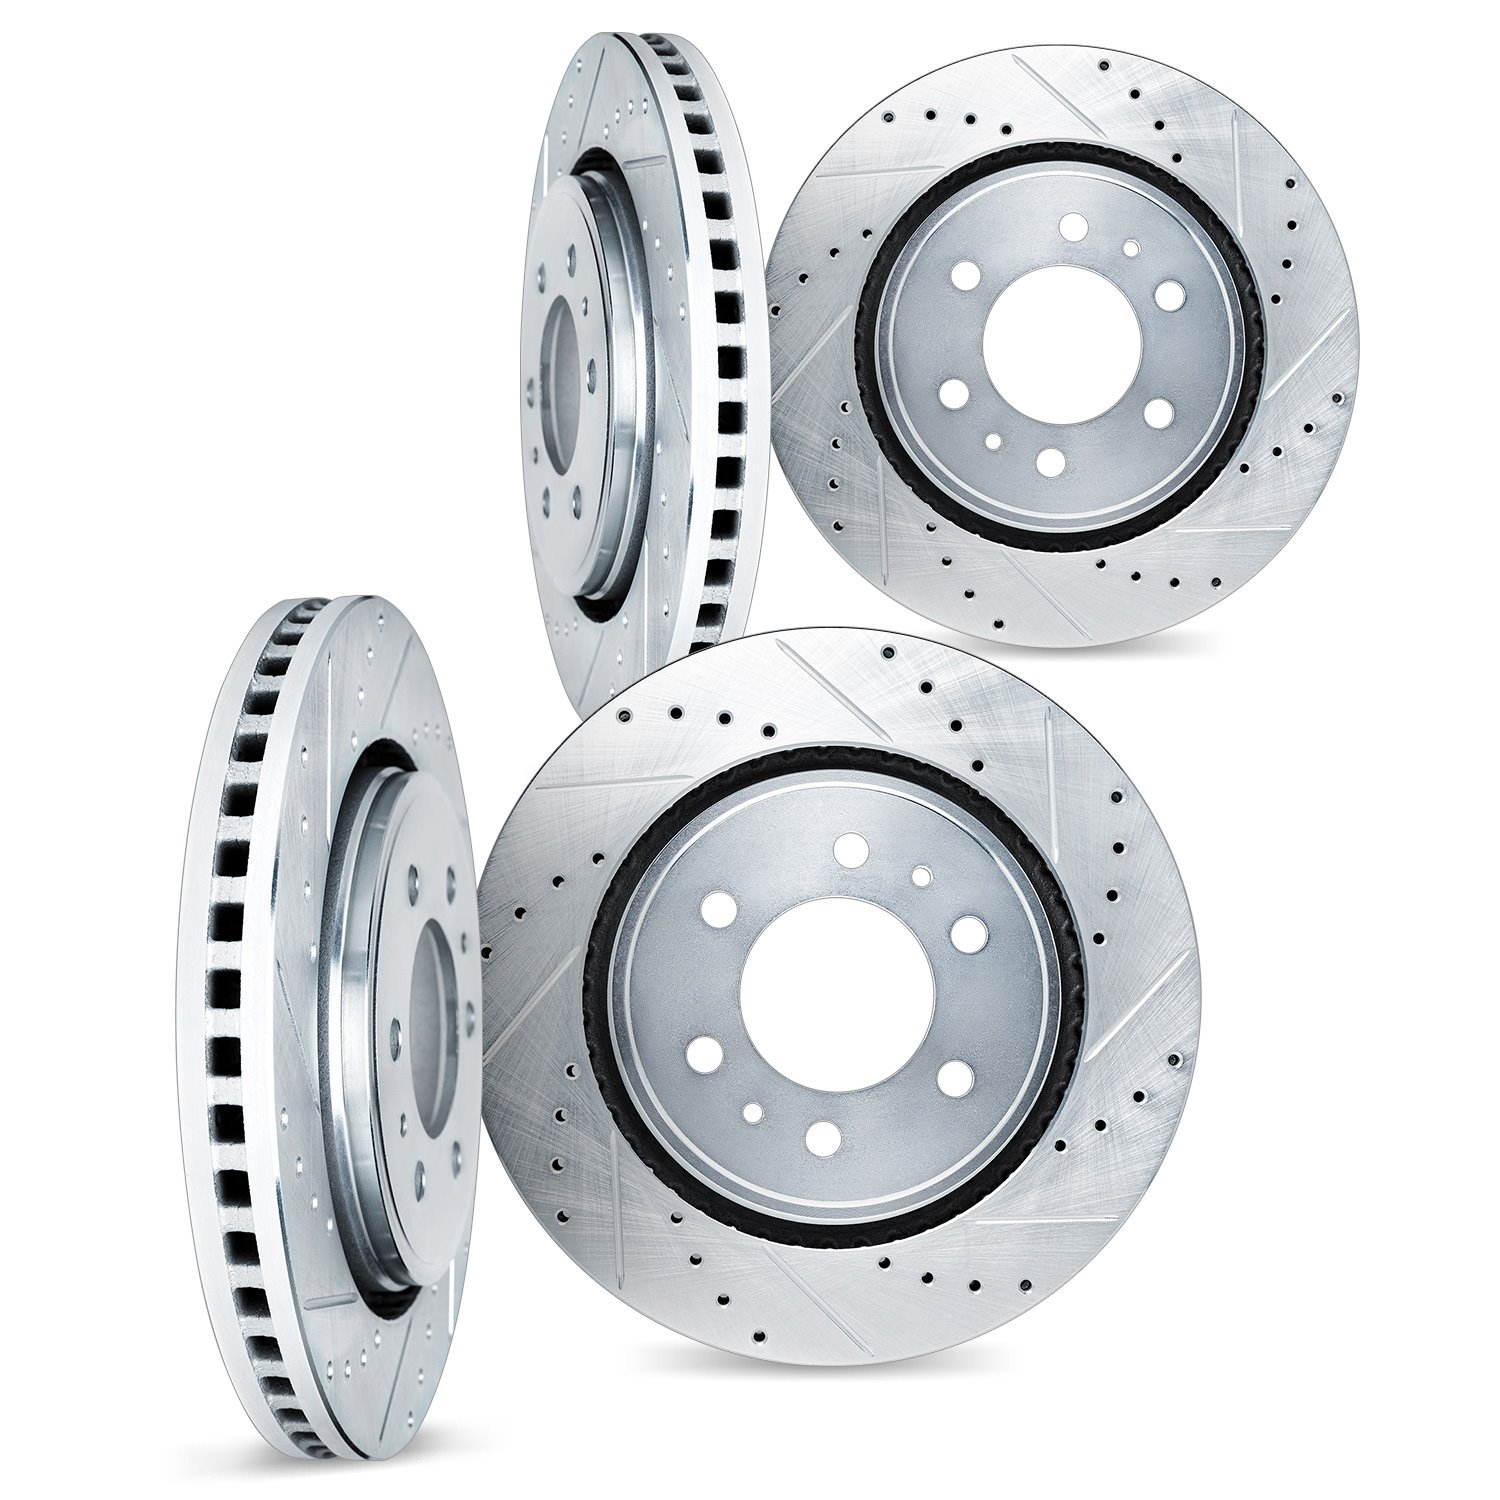 7004-67077 Drilled/Slotted Brake Rotors [Silver], Fits Select Multiple Makes/Models, Position: Front and Rear